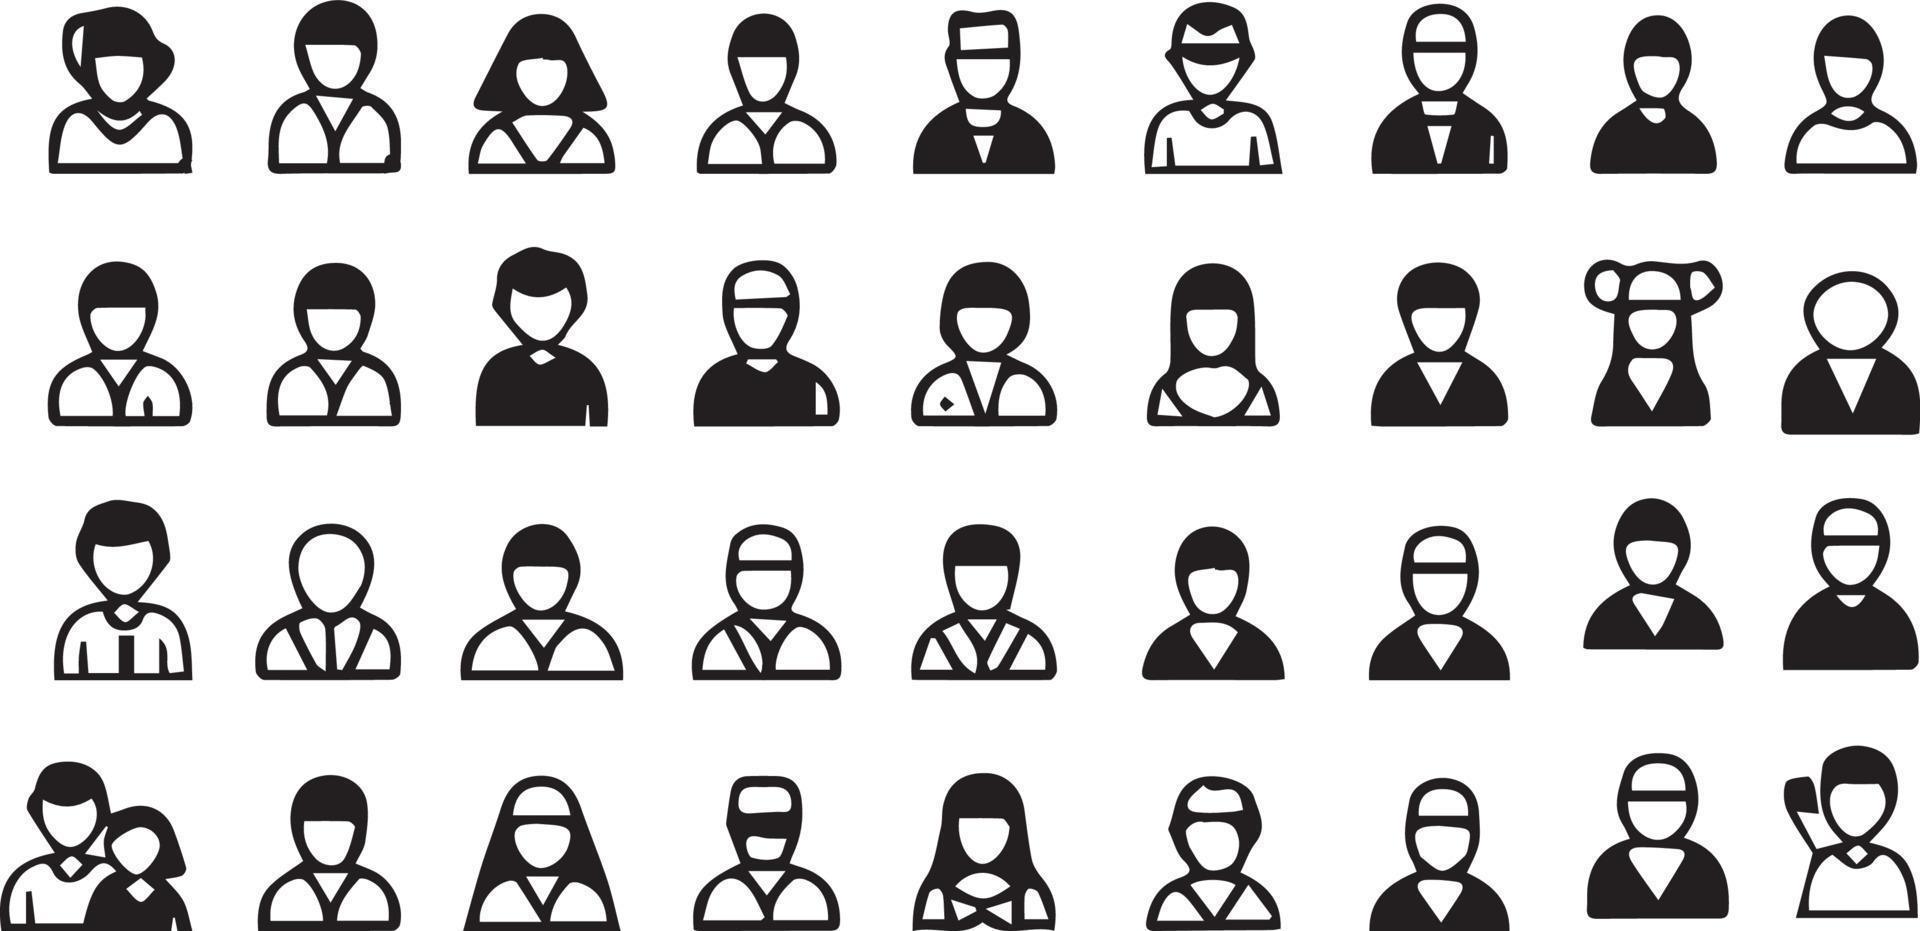 People Avatar Icon Pack vector